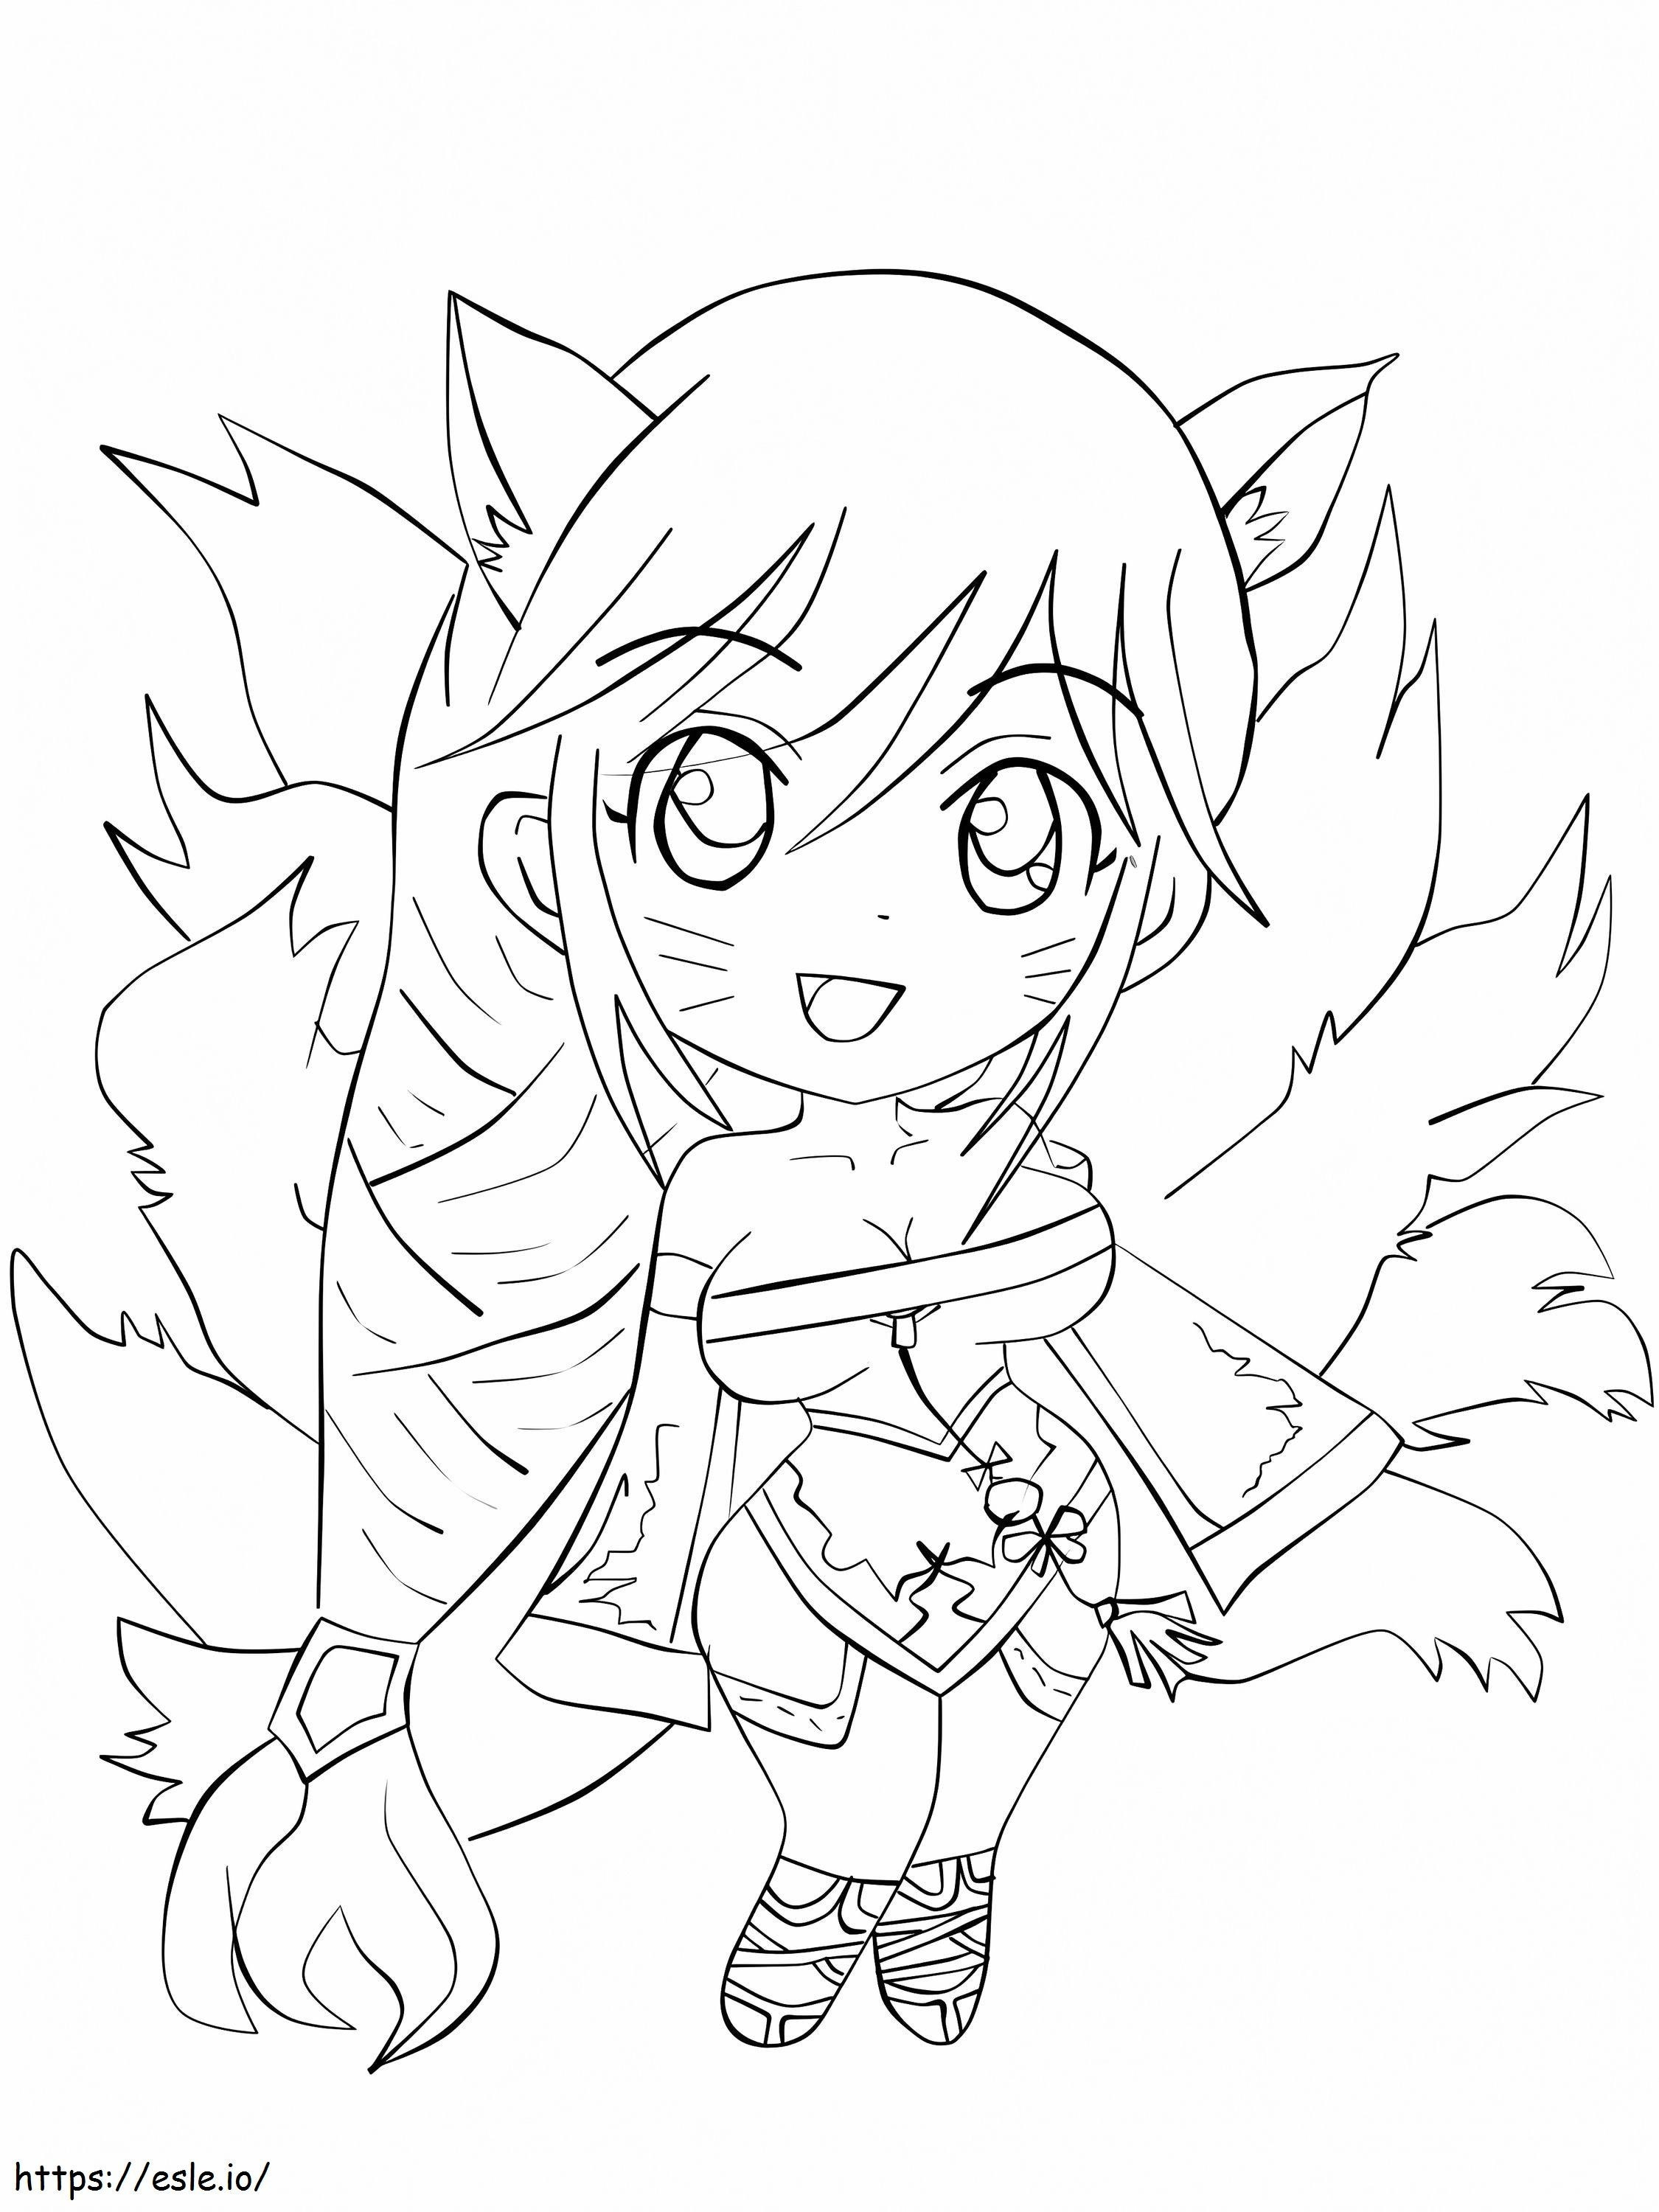 1560846485_Chibi Ahri A4 coloring page